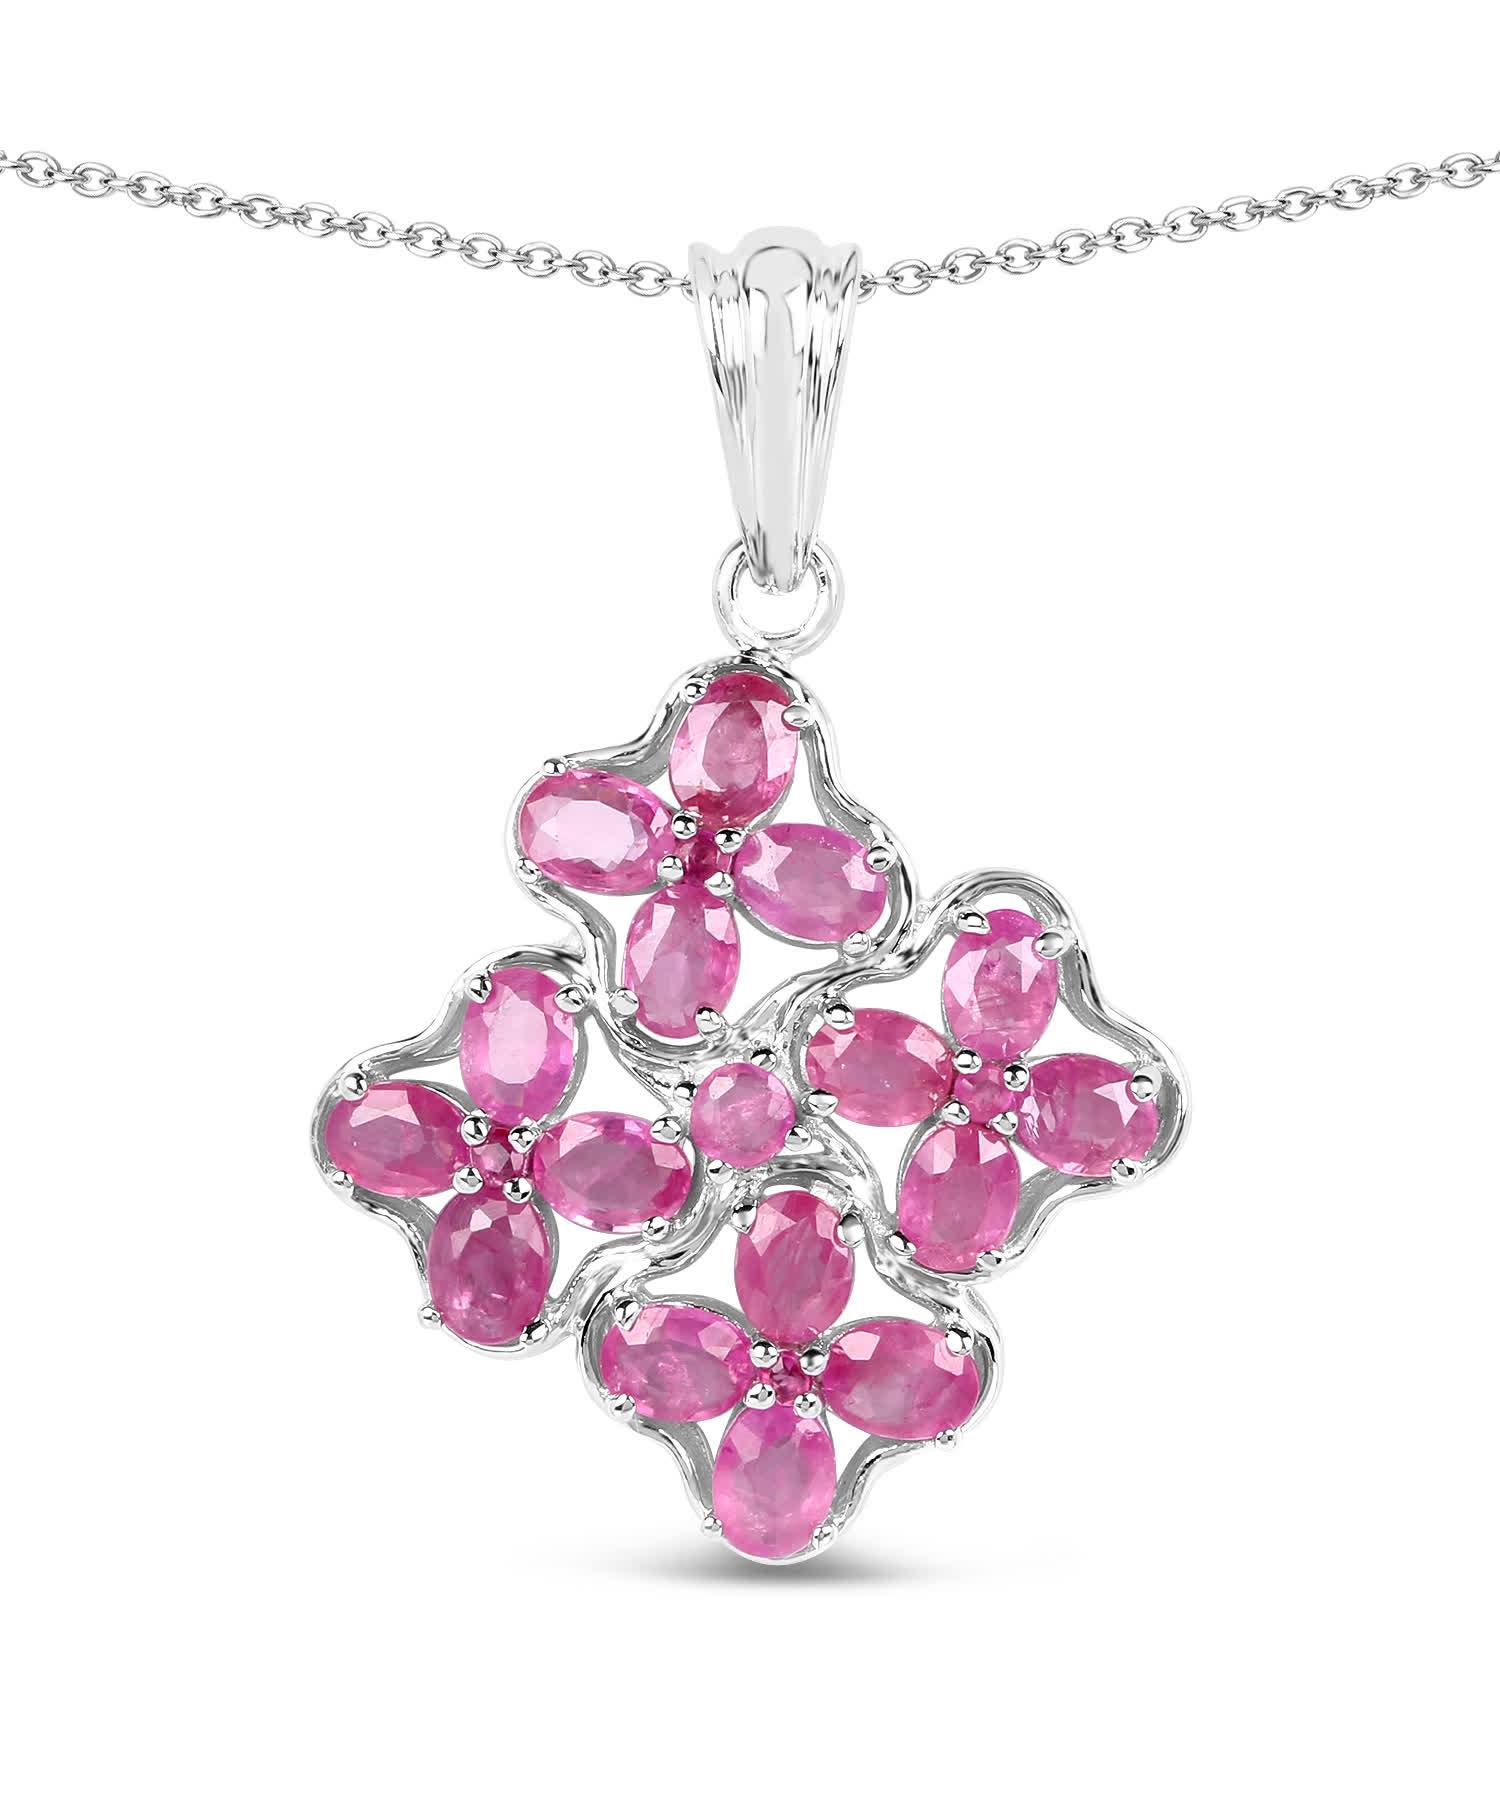 3.72ctw Natural Ruby Rhodium Plated 925 Sterling Silver Pendant With Chain View 1